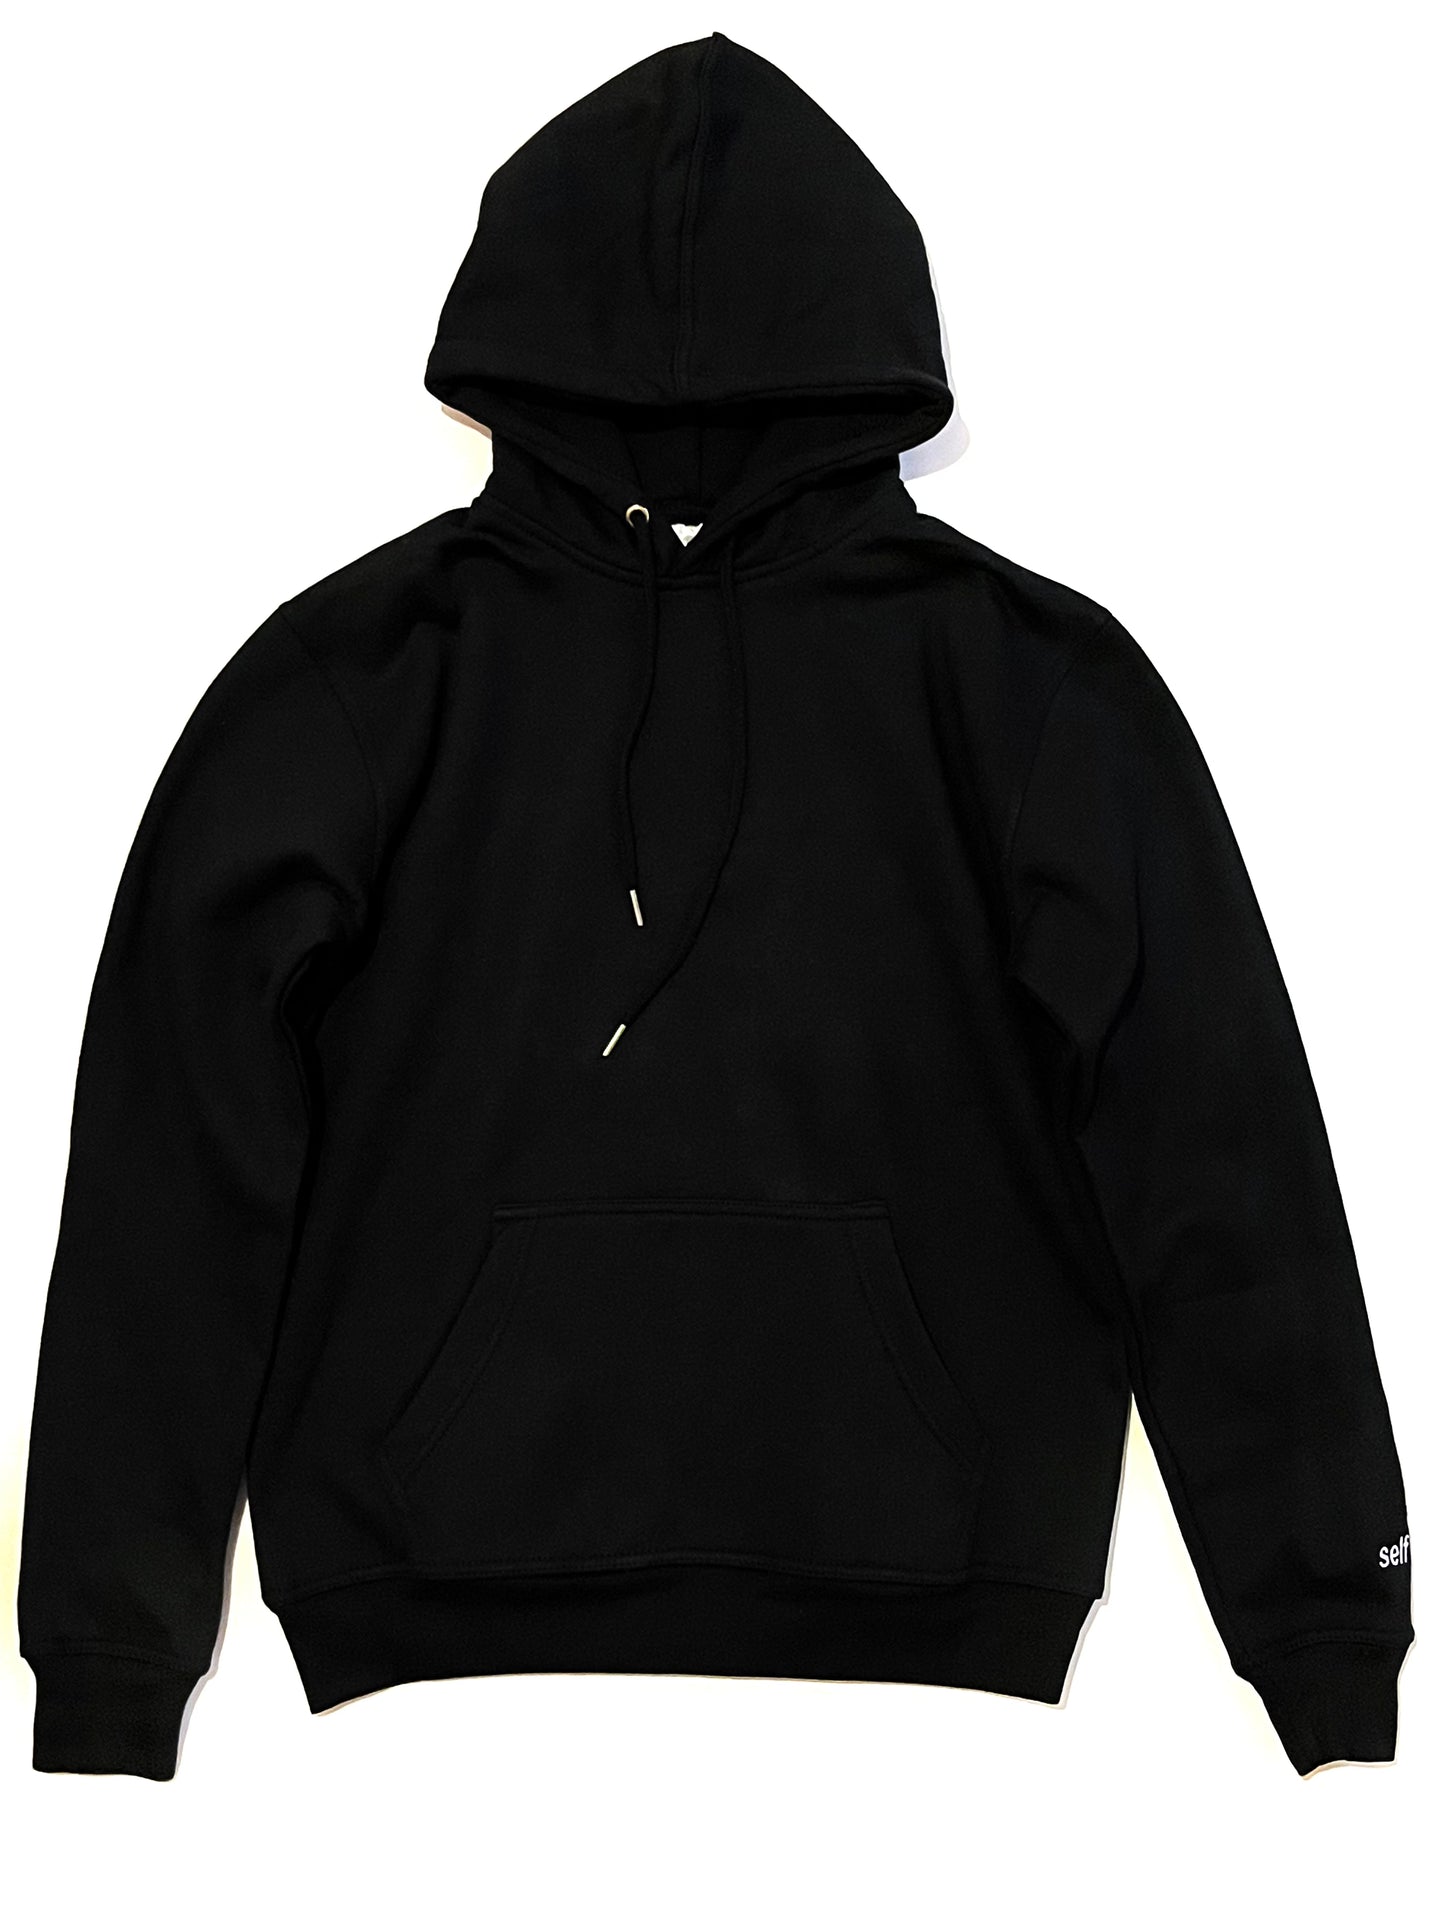 For Me Hoodie